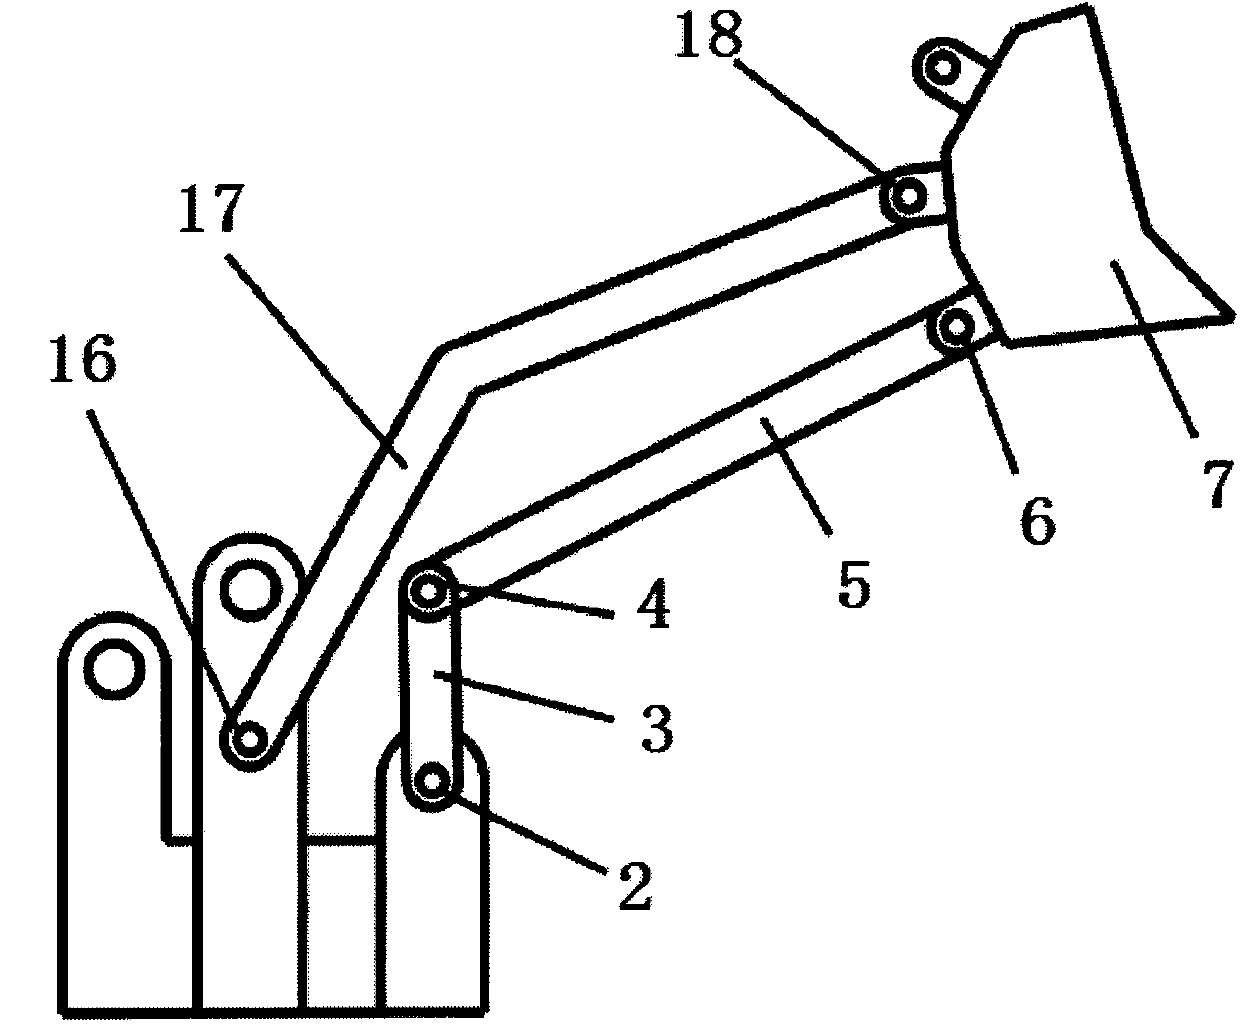 Large-rigidity multi-connecting-rod controllable mechanical loading mechanism